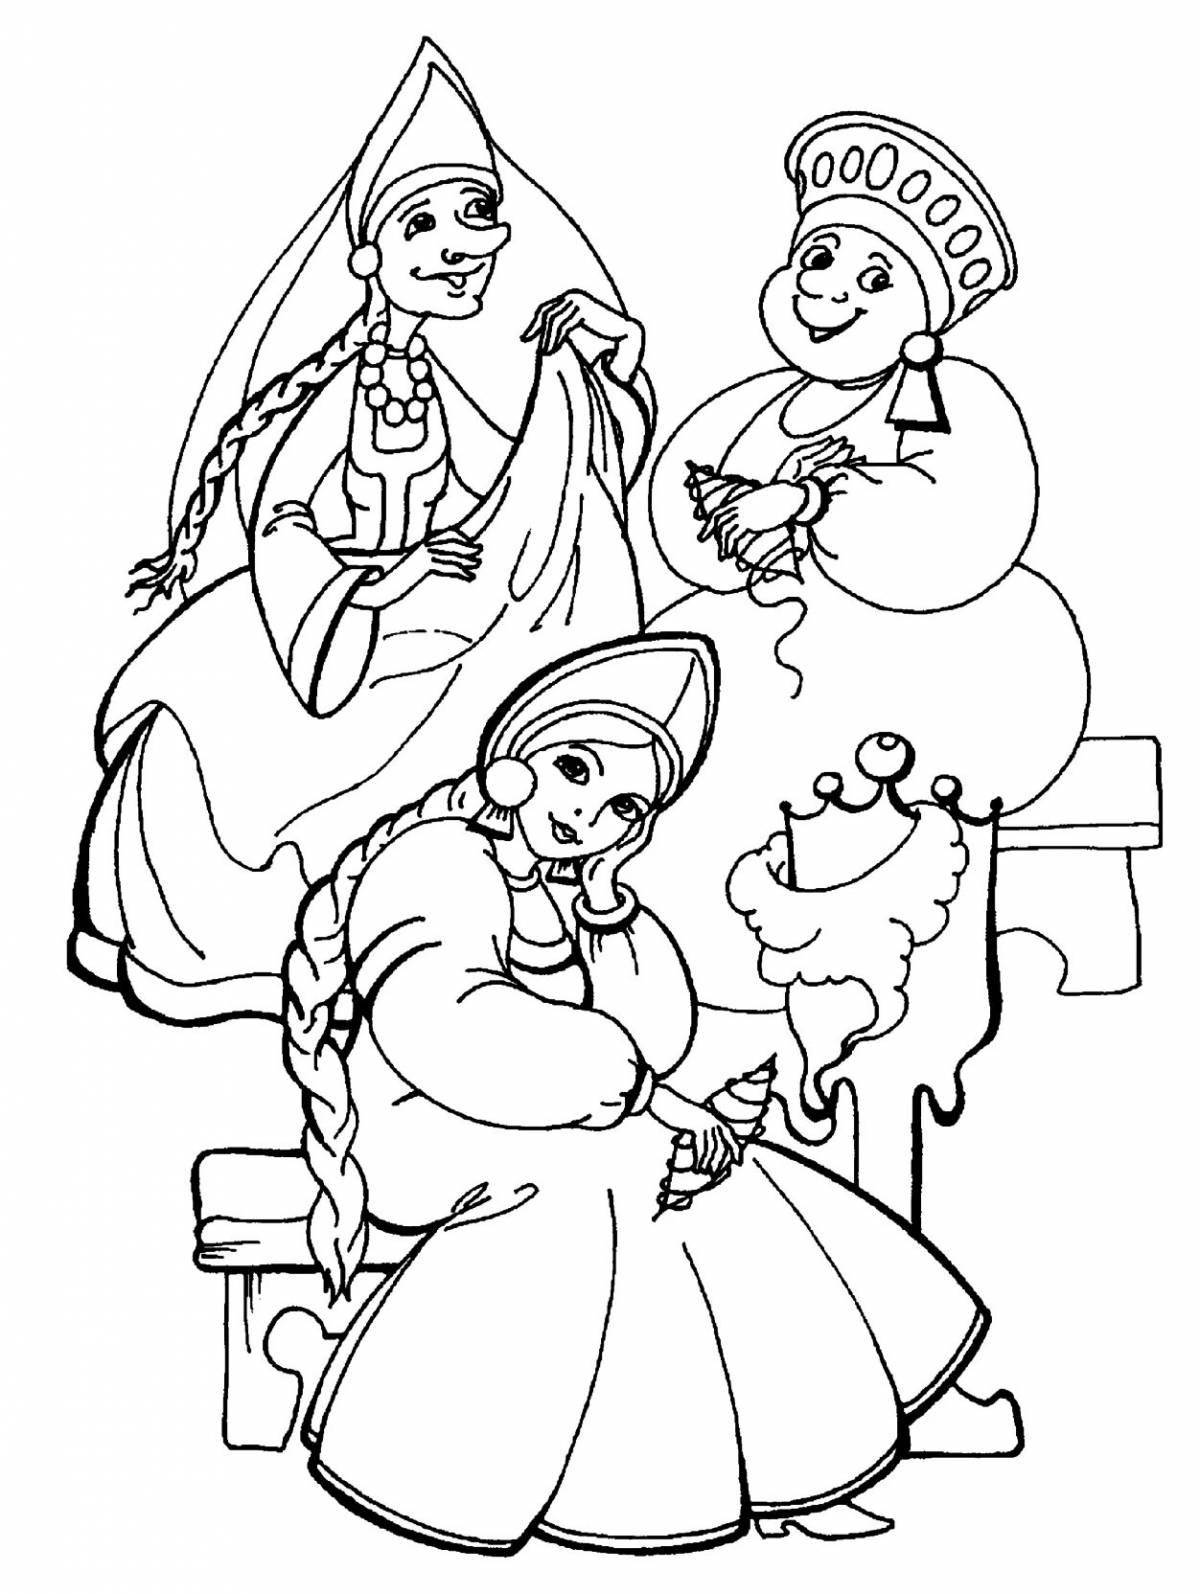 Fascinating coloring book based on Pushkin's fairy tales